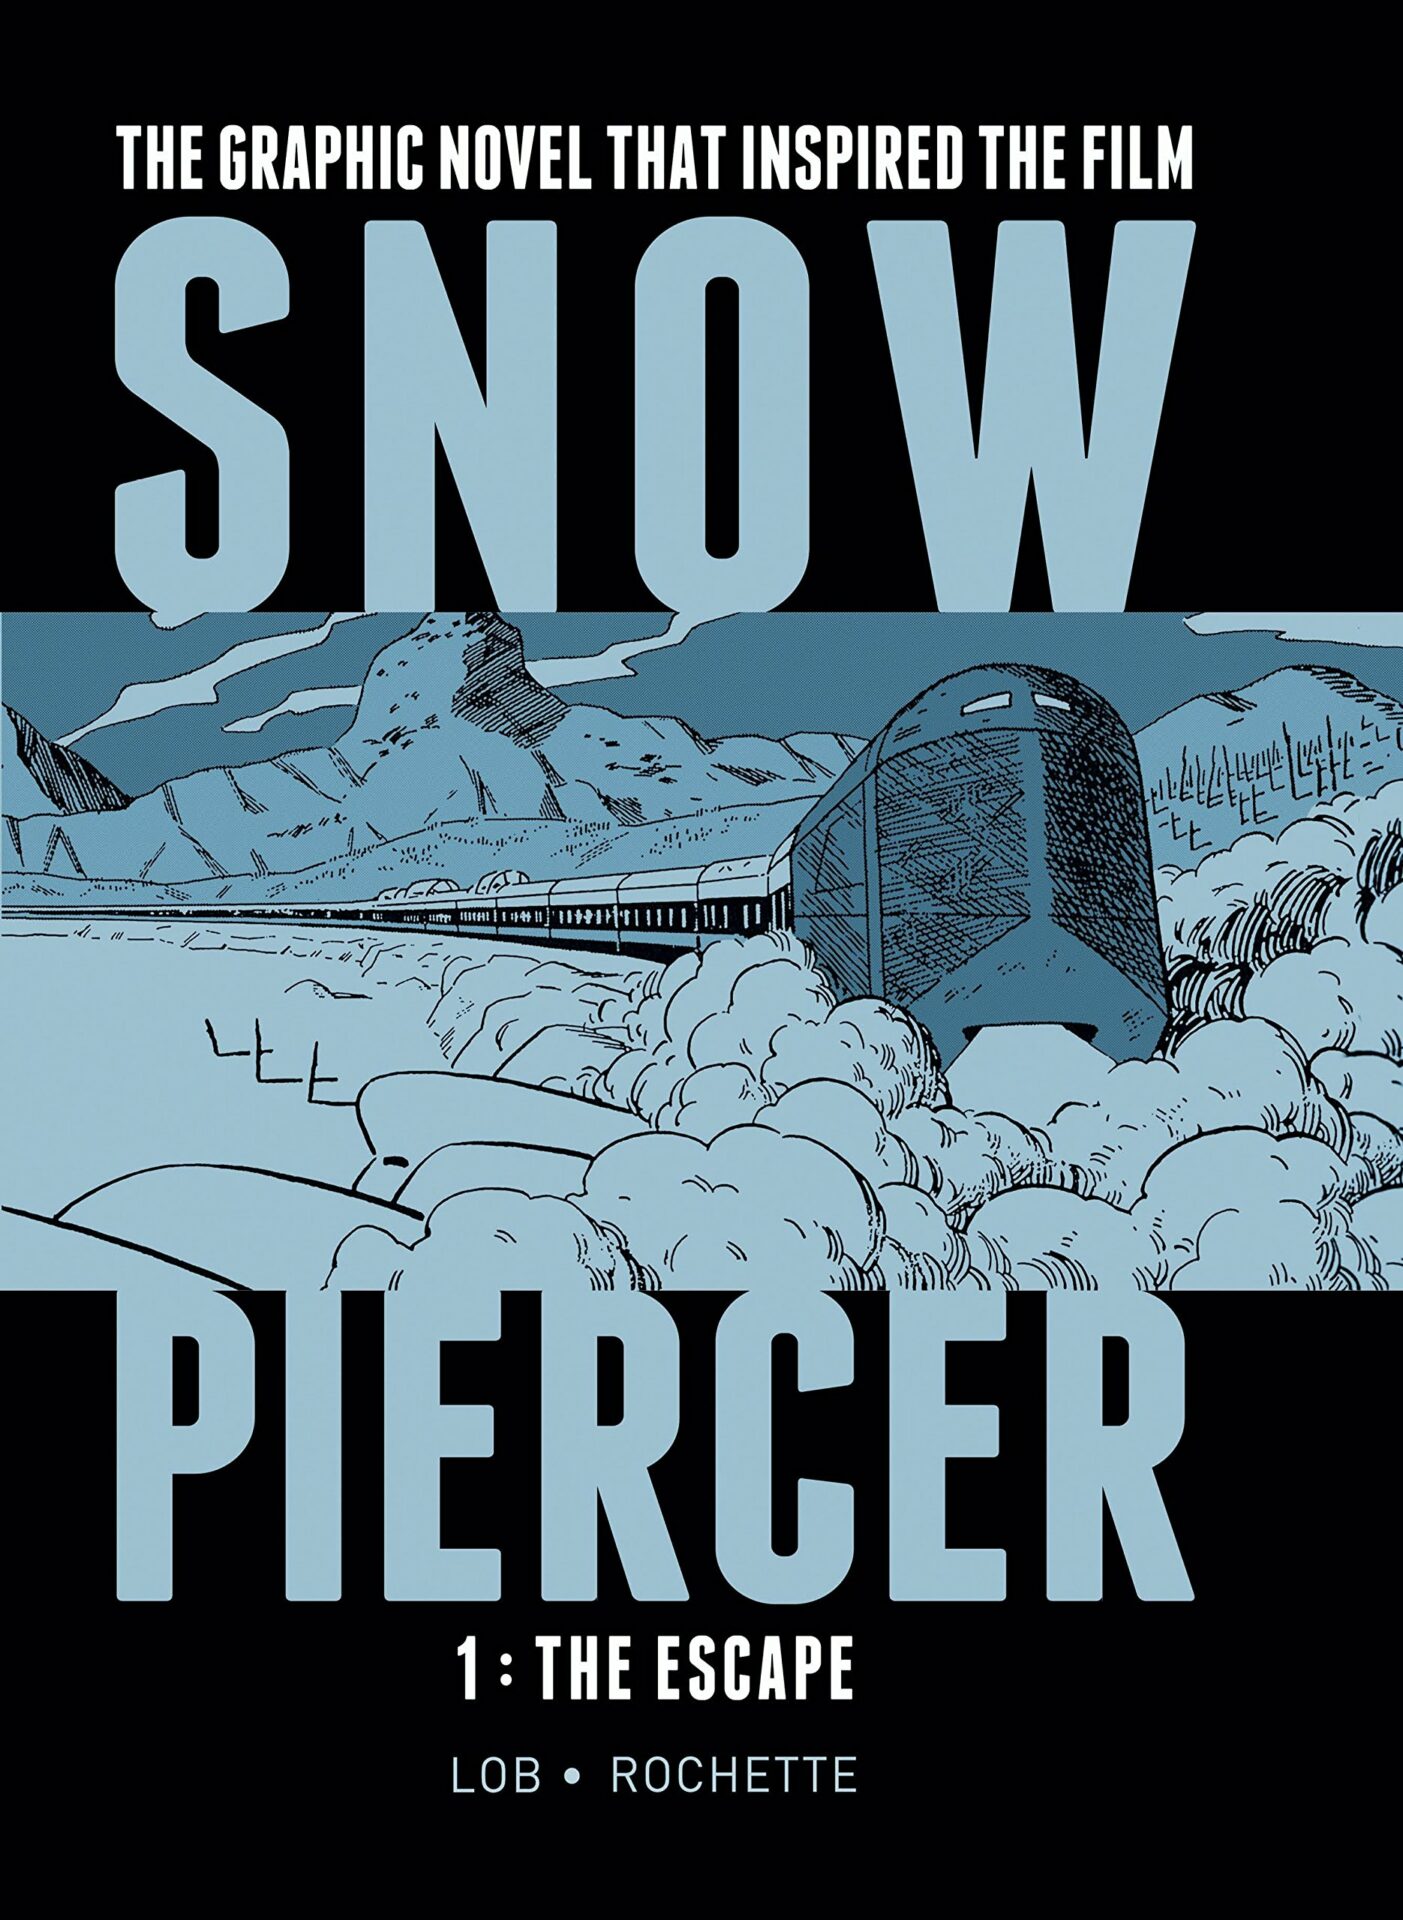 the cover of The Snowpiercer by Jacques Lob and Jean-Marc Rochette